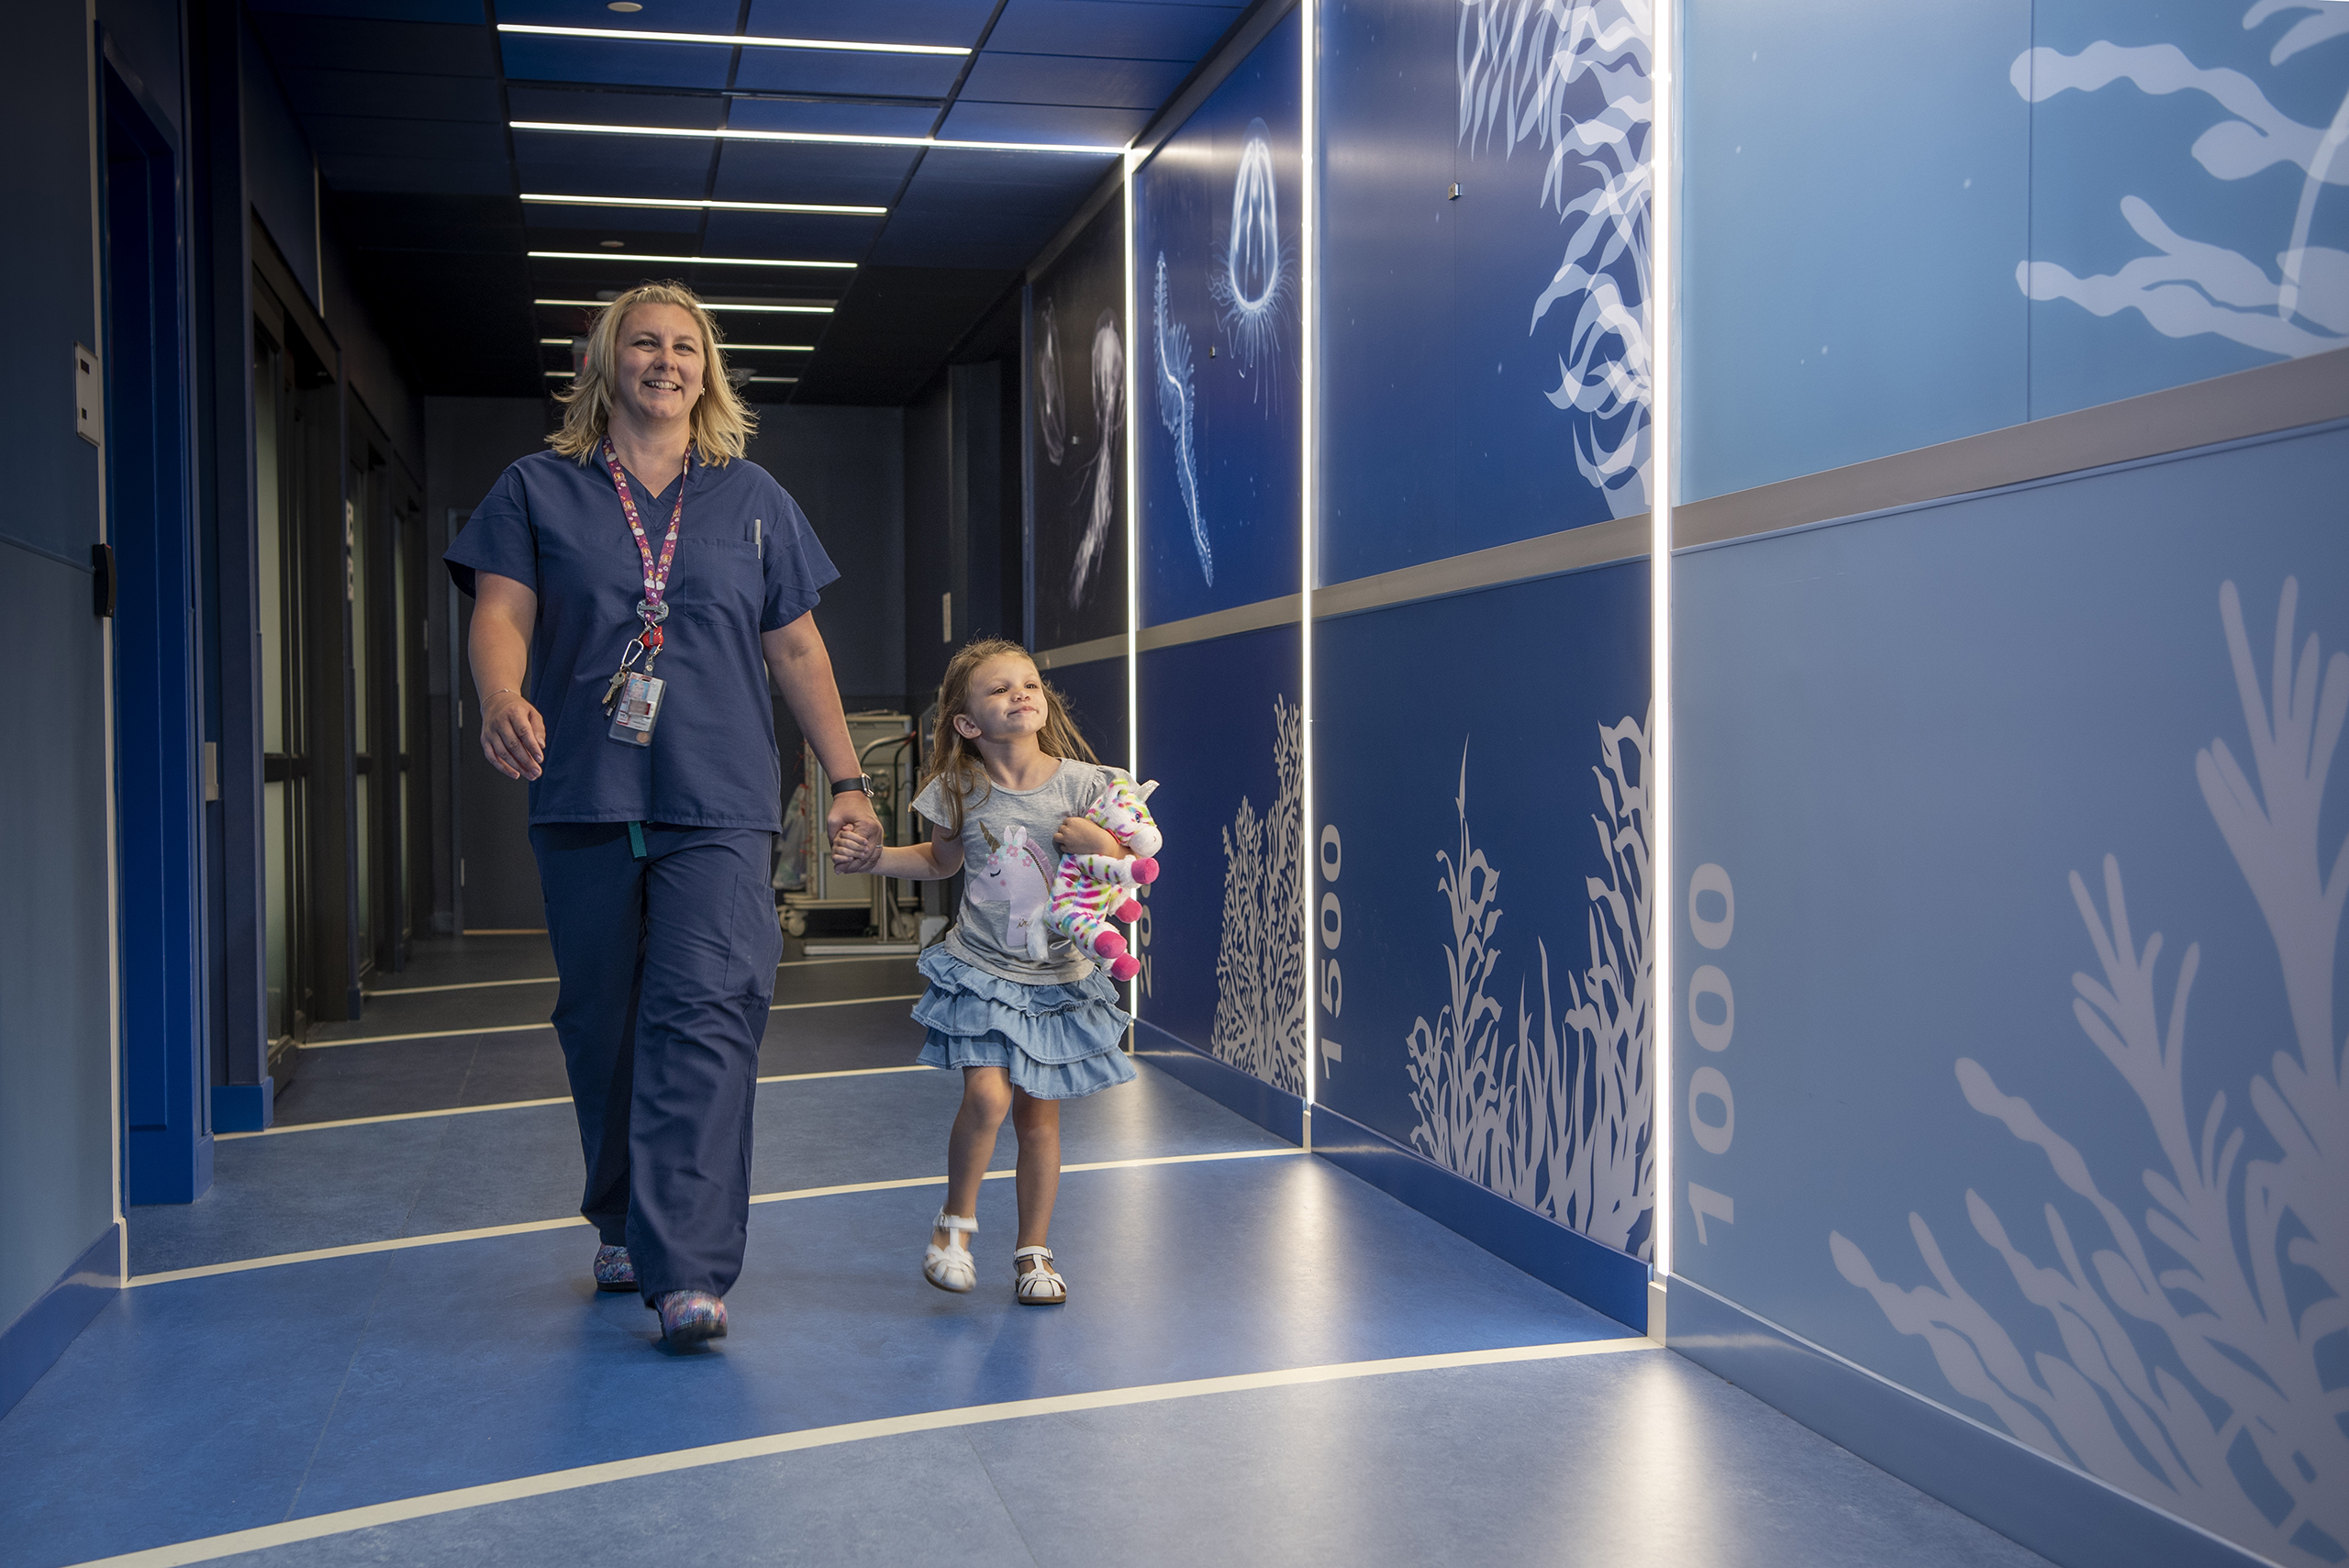 Young Girl Patient with Radiology Nurse in Hallway